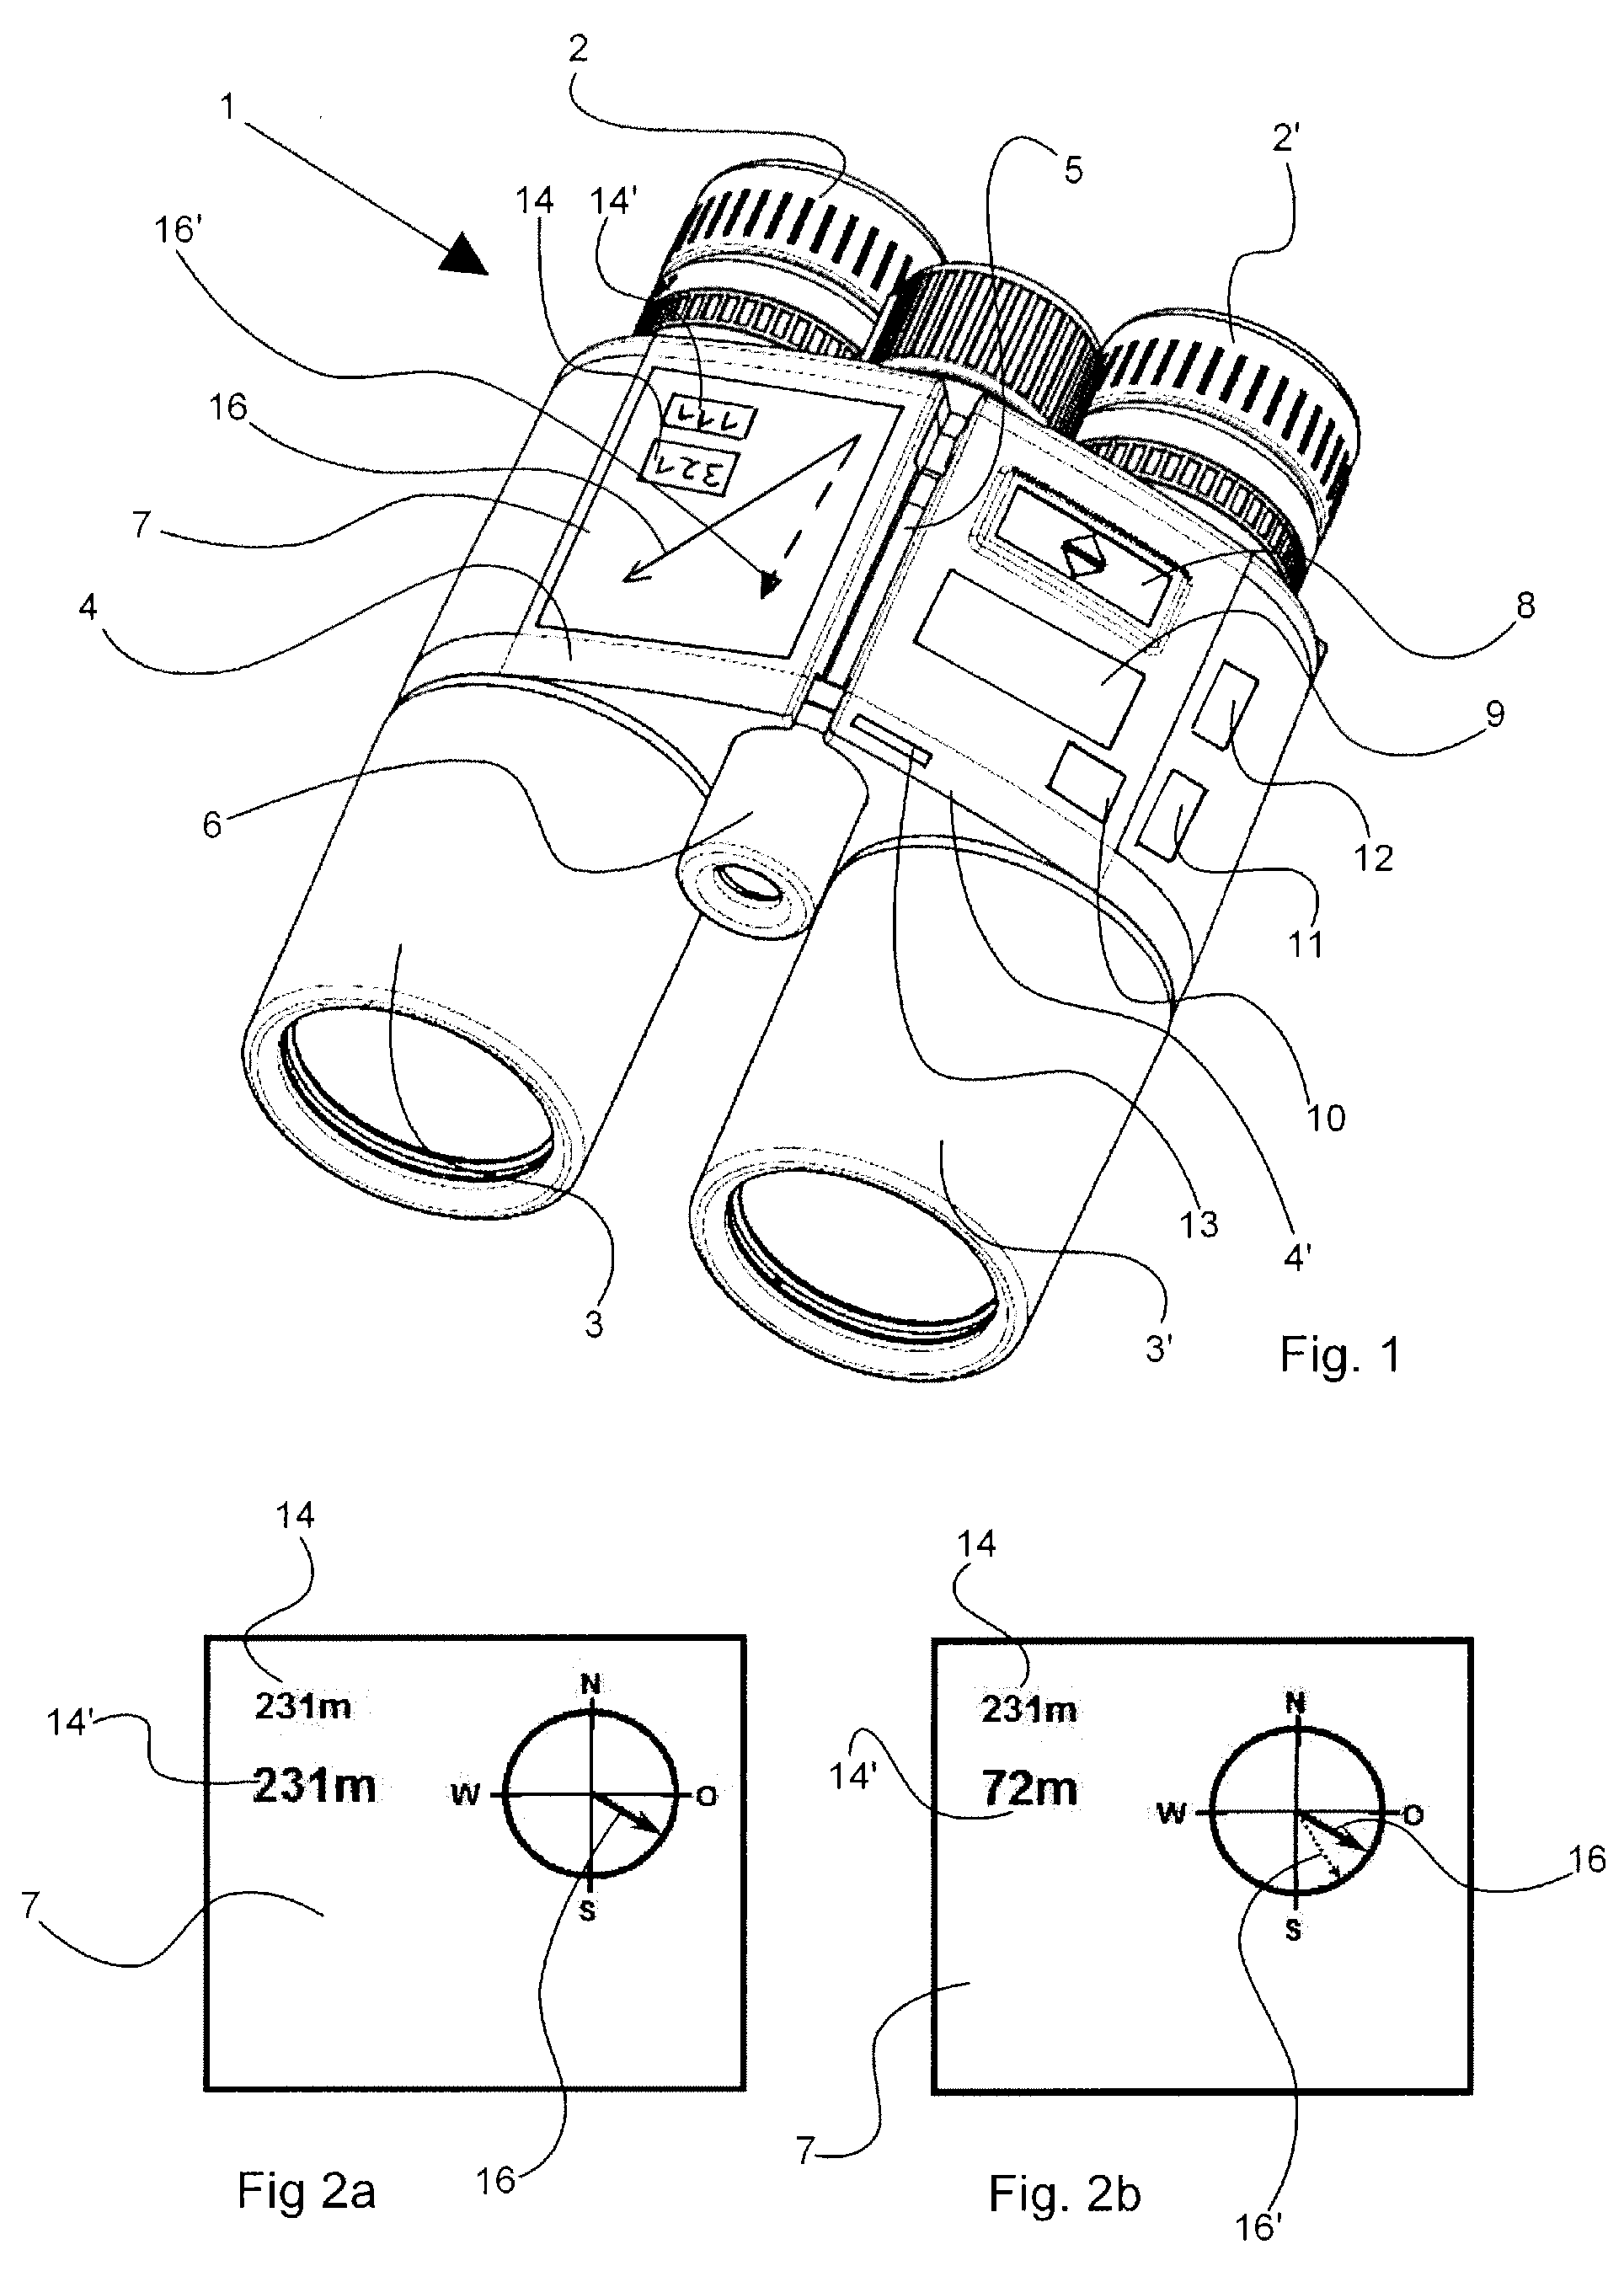 Optical observation device for target acquisition and navigation